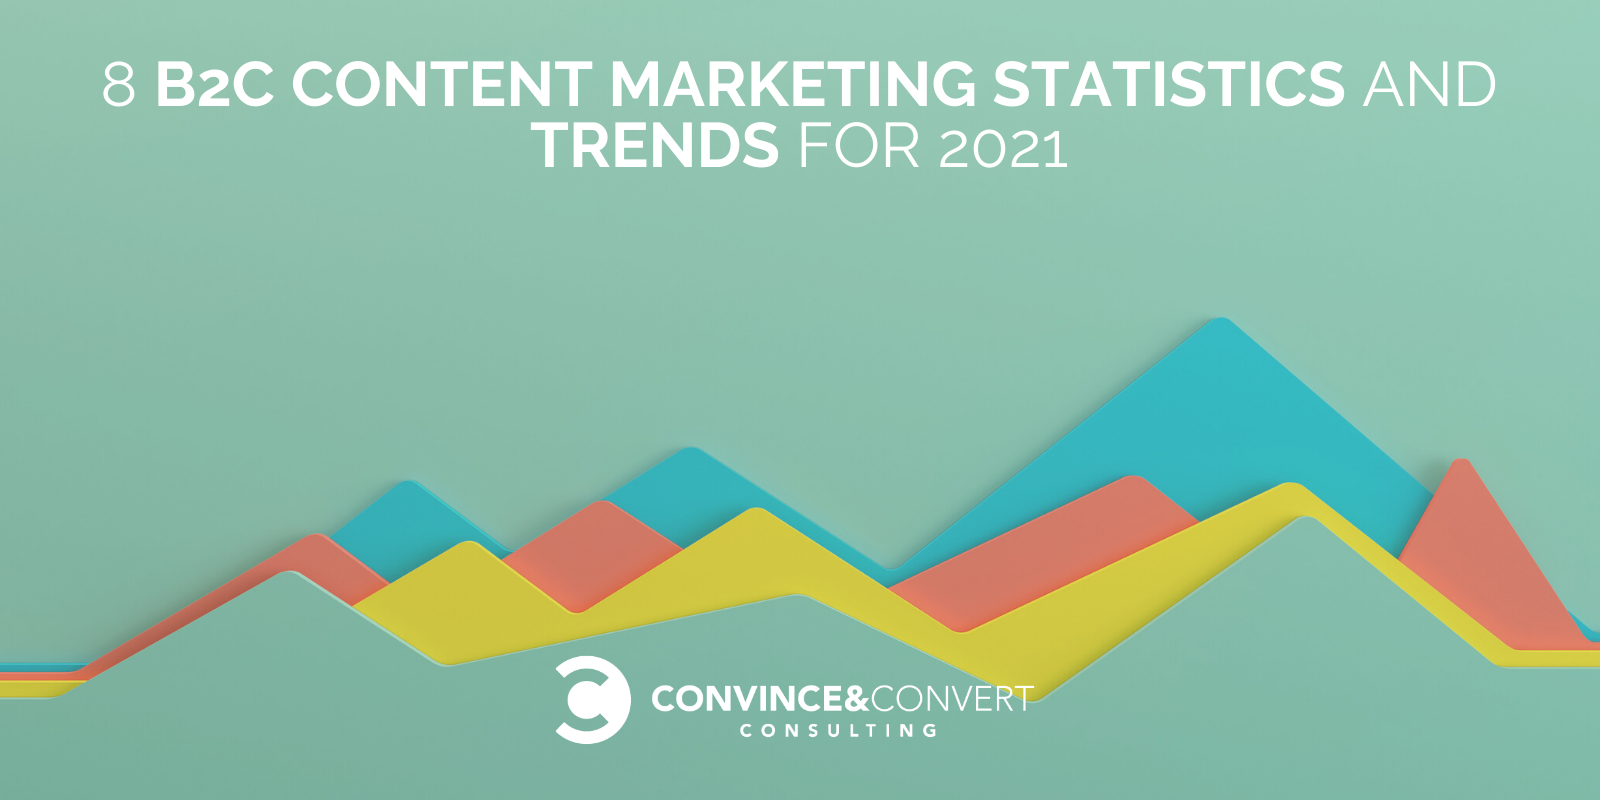 8 B2C Content Marketing Statistics and Trends for 2021